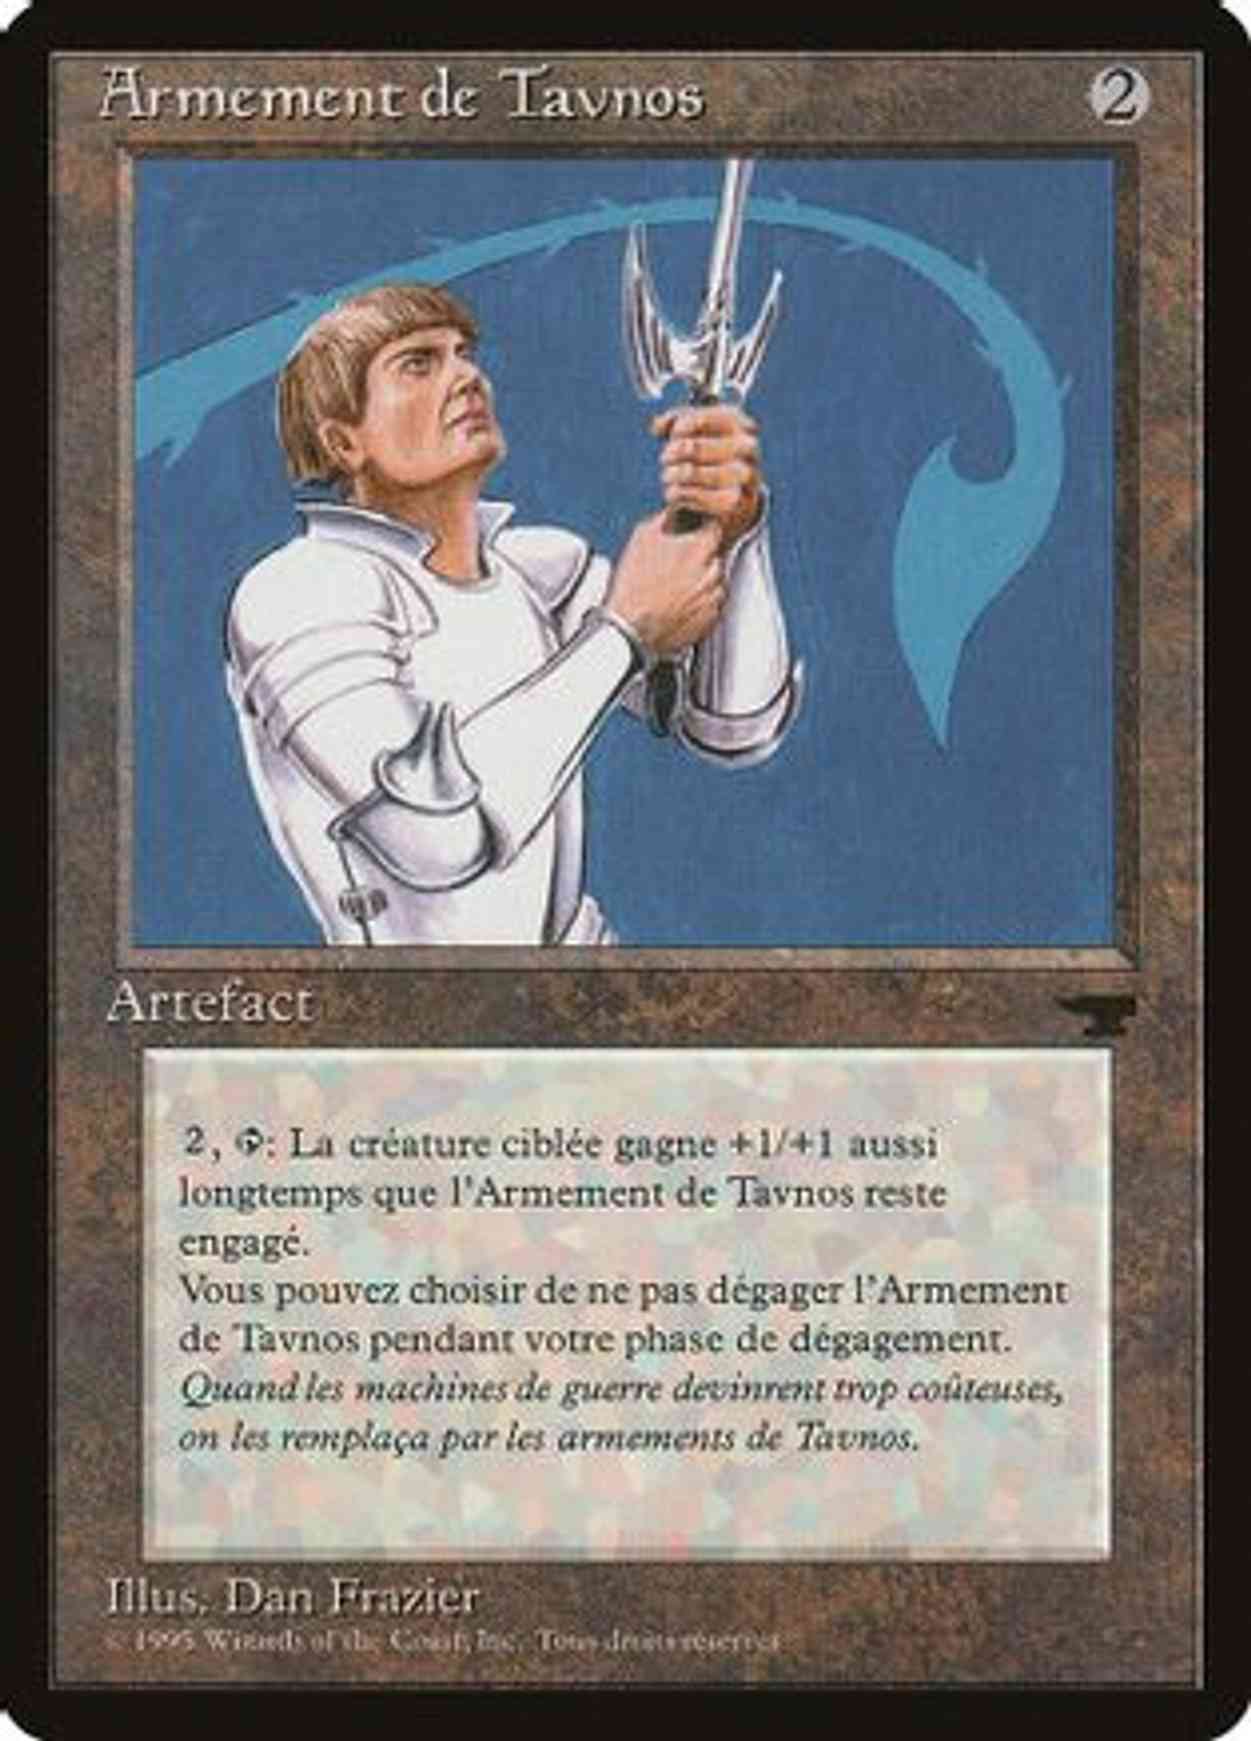 Tawnos's Weaponry (French) - "Armement de Tavnos" magic card front